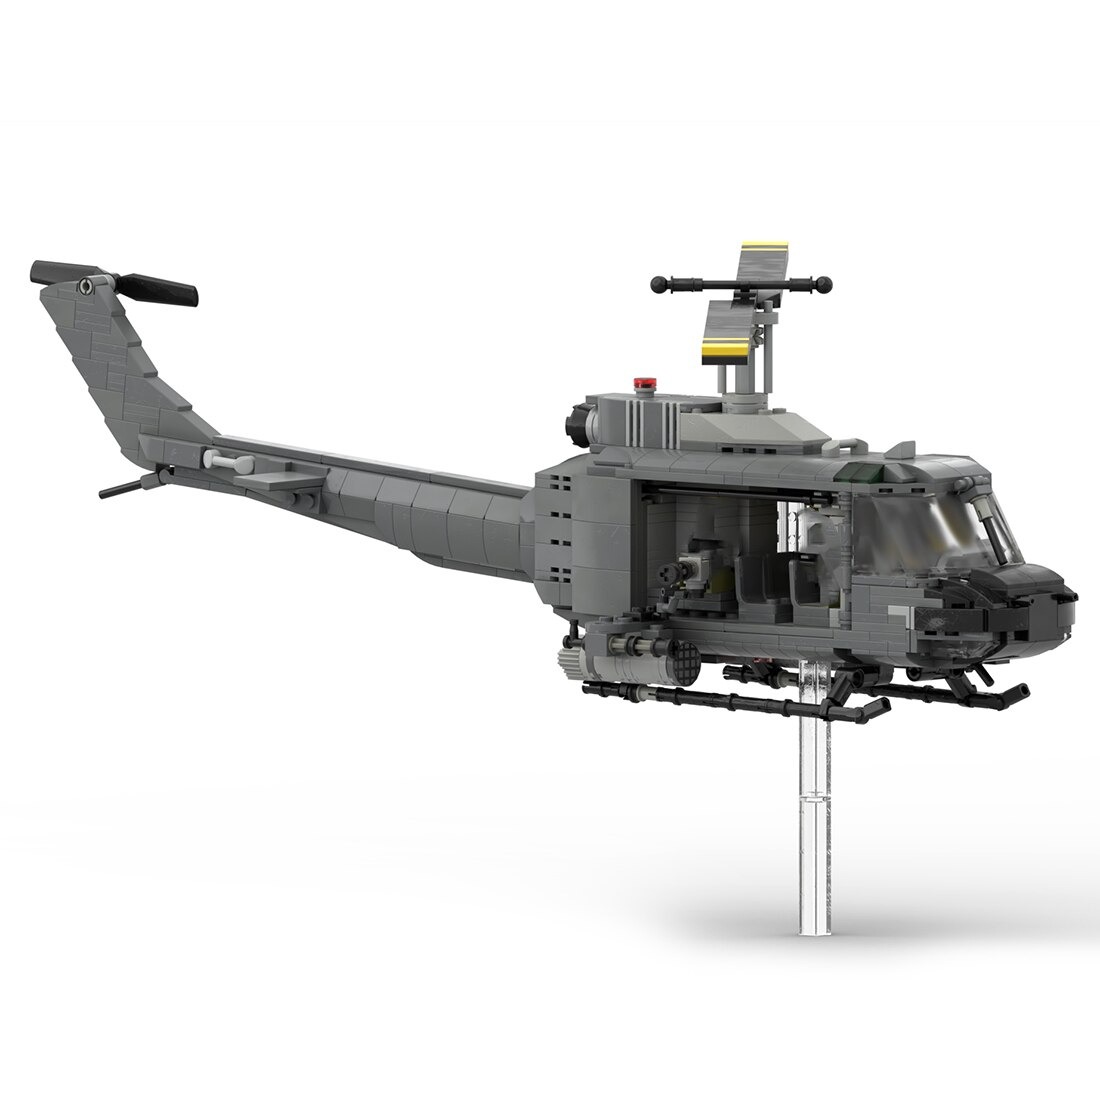 authorized moc 74181 bell uh 1 iroquois main 3 - DECOOL